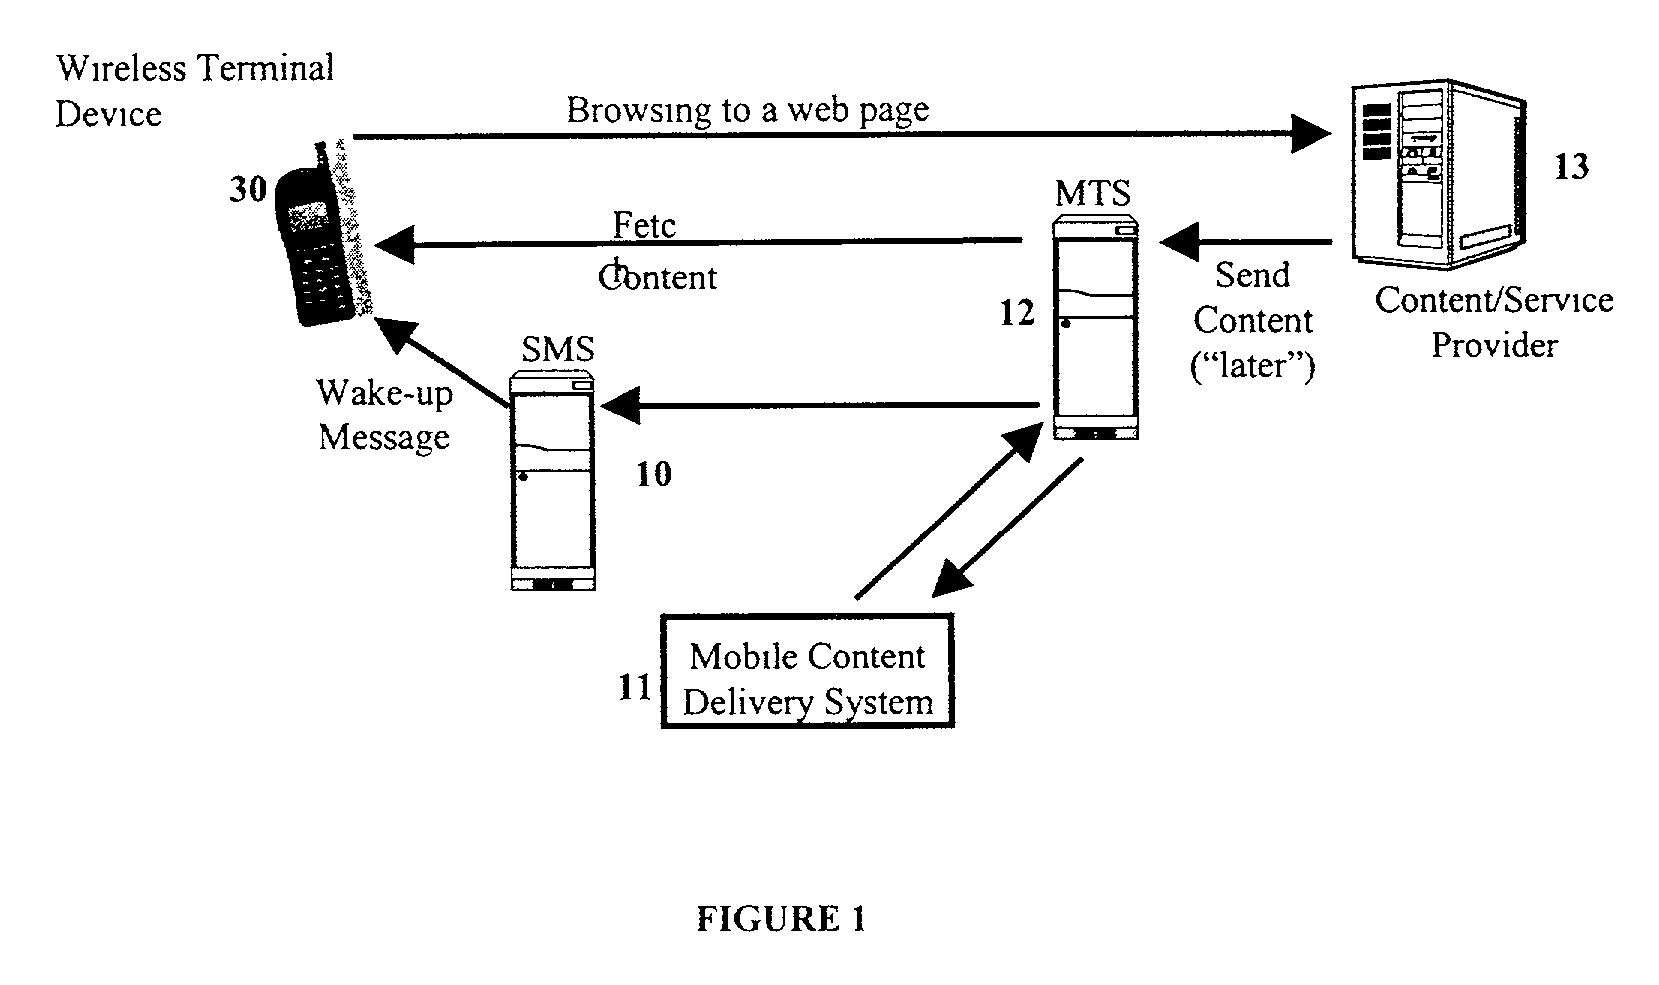 Mobile content delivery system